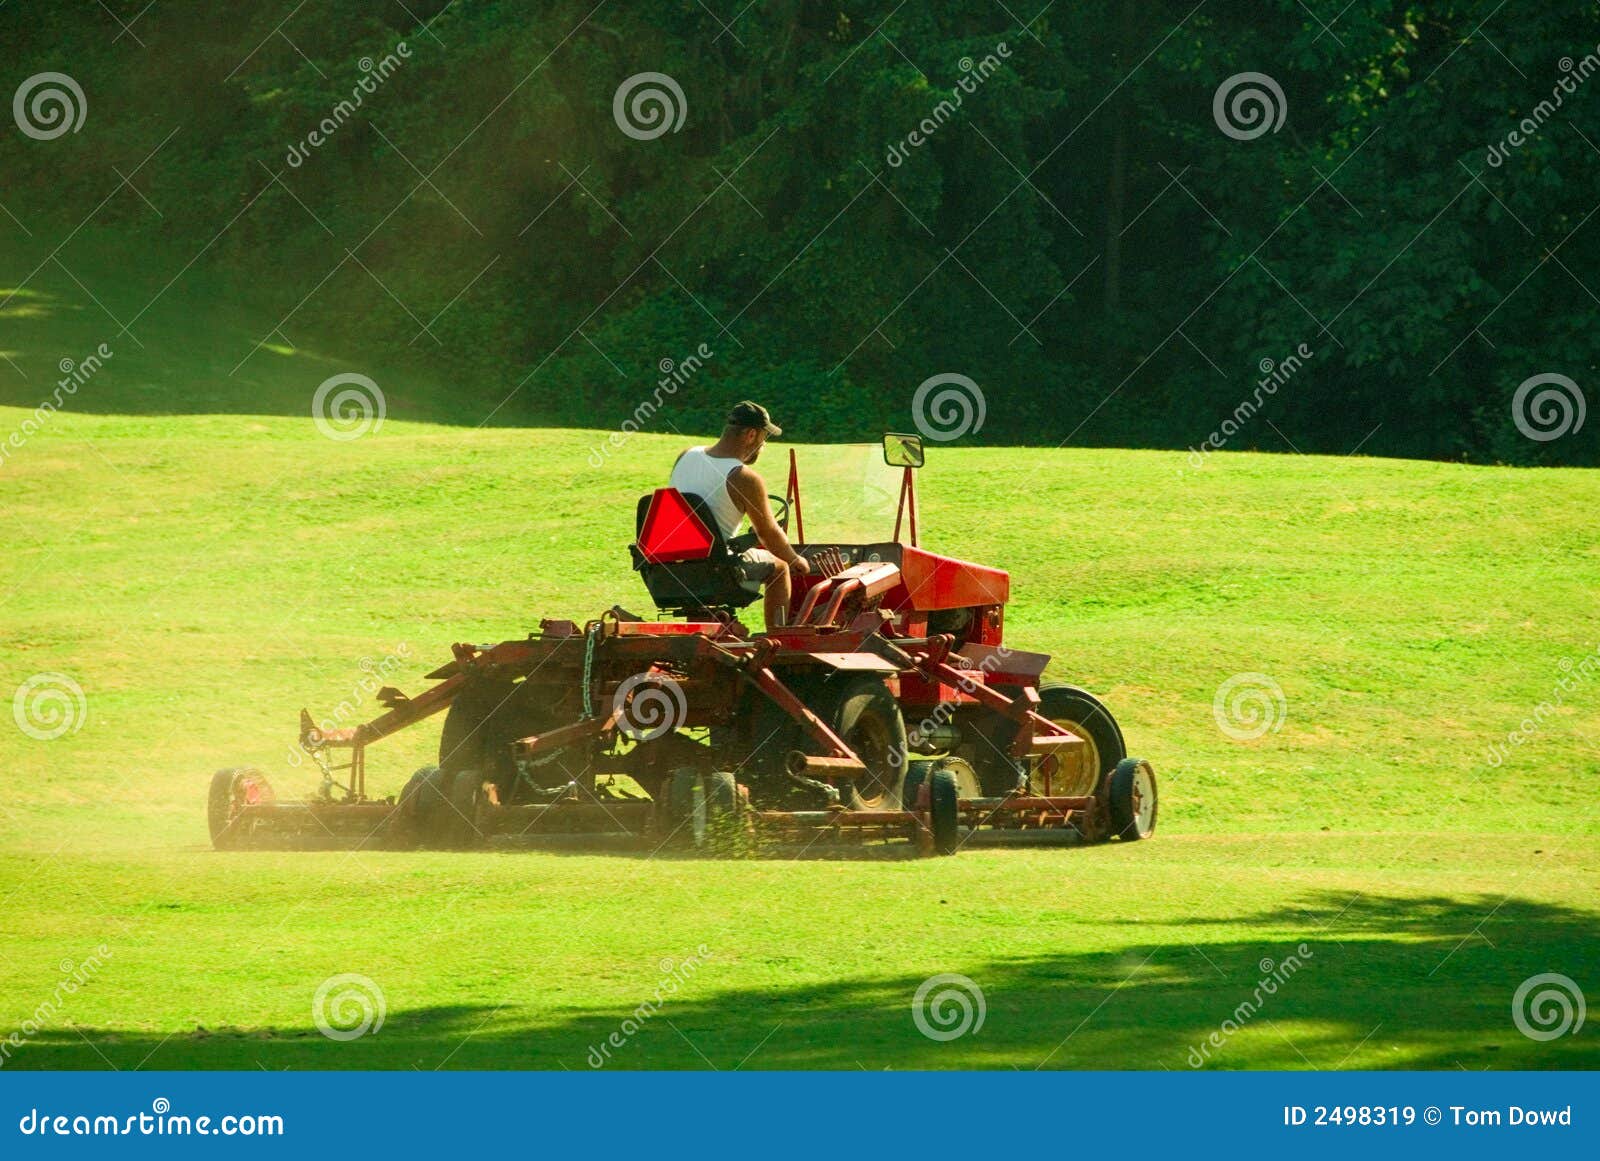 golf course mowing